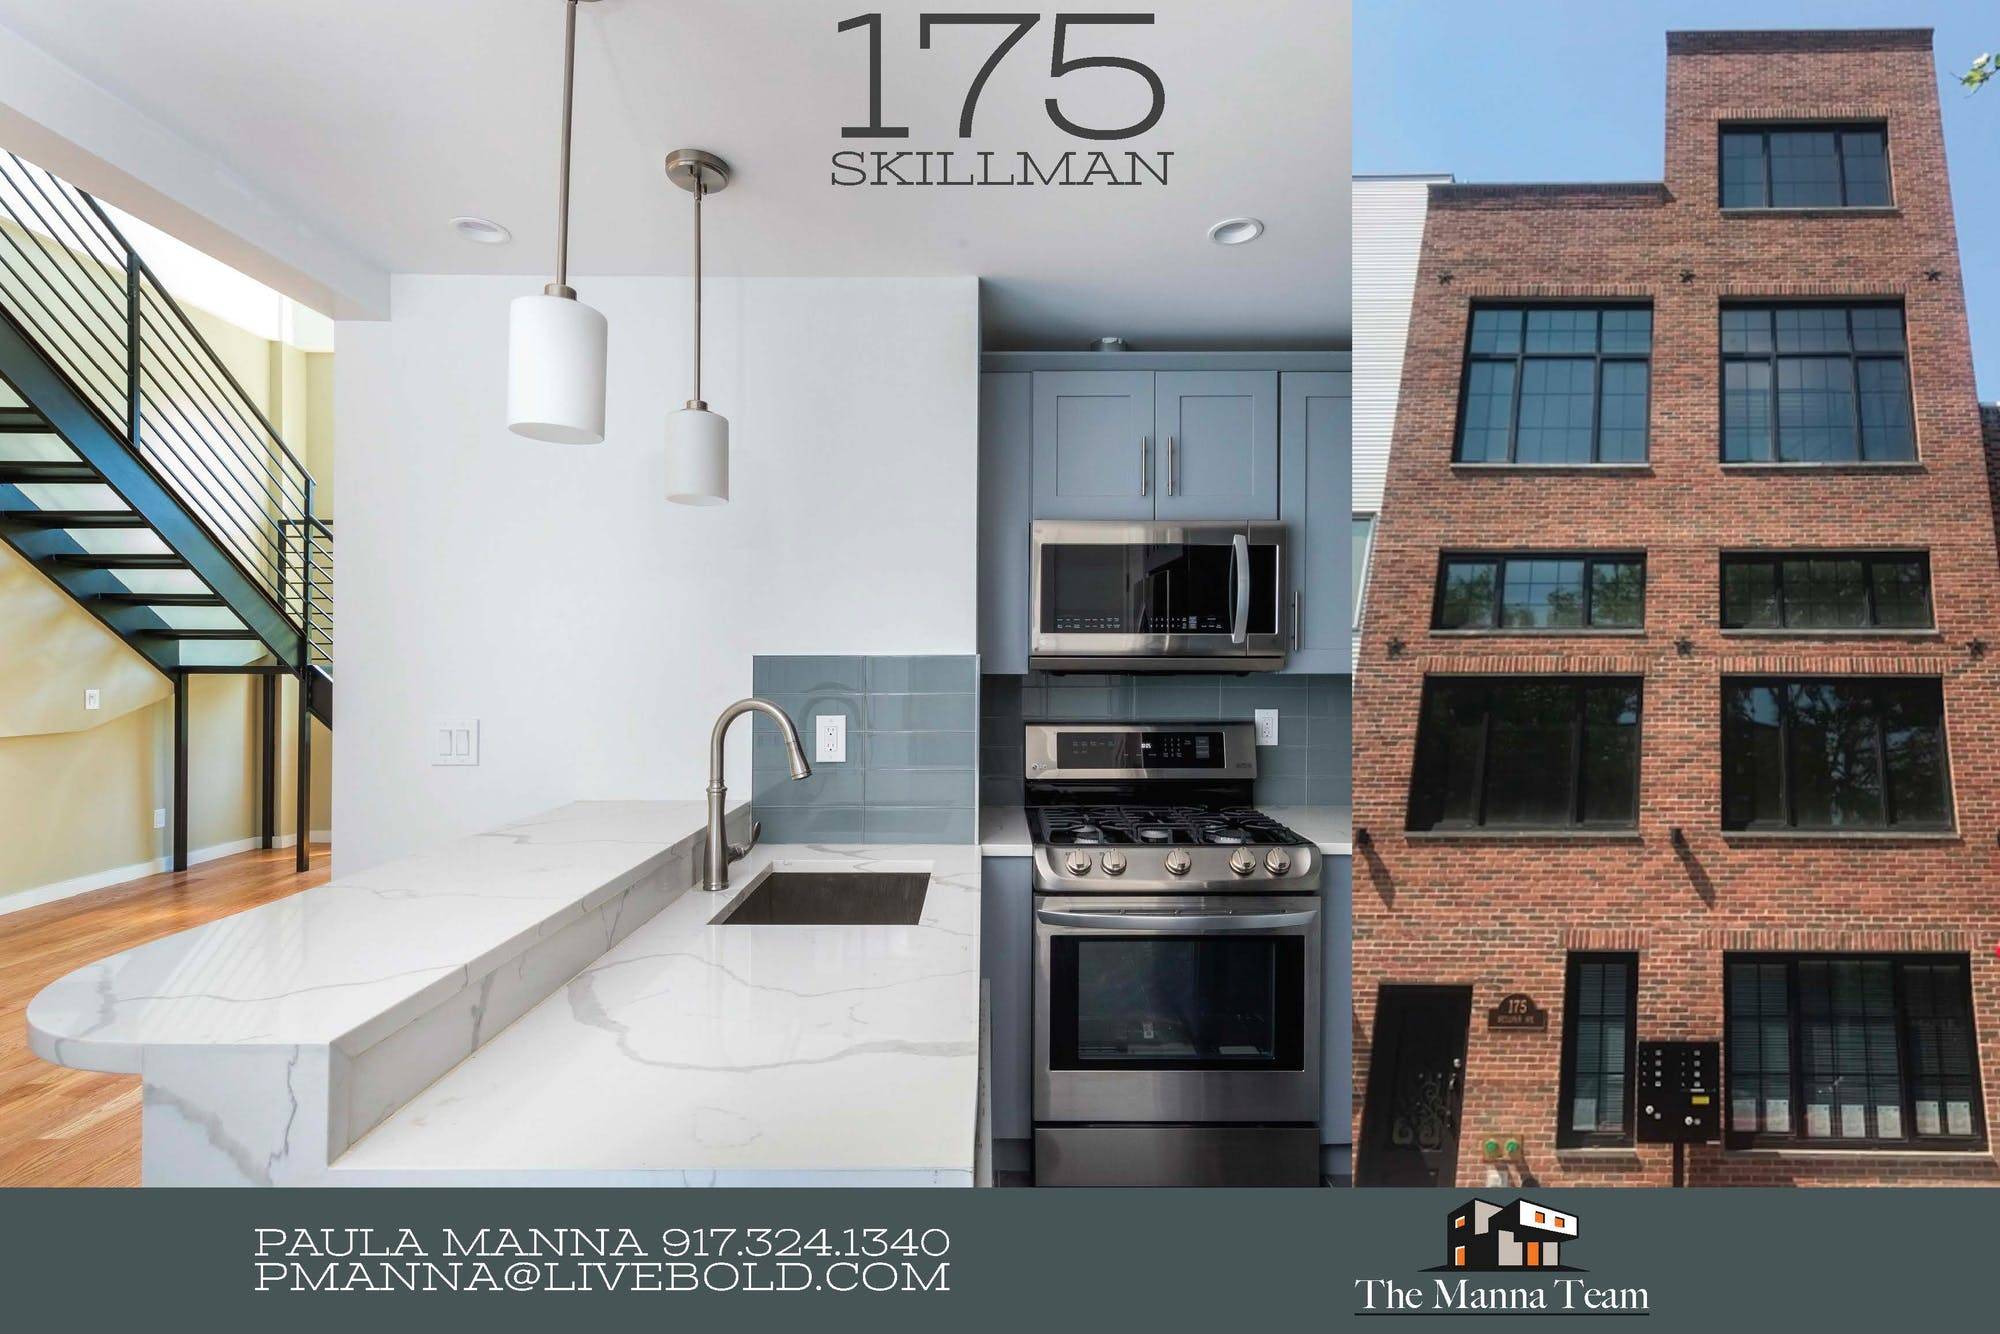 7 Unit Fully Leased New Development 175 Skillman is your opportunity to buy an exceptionally built brand new investment property with immense upside potential.